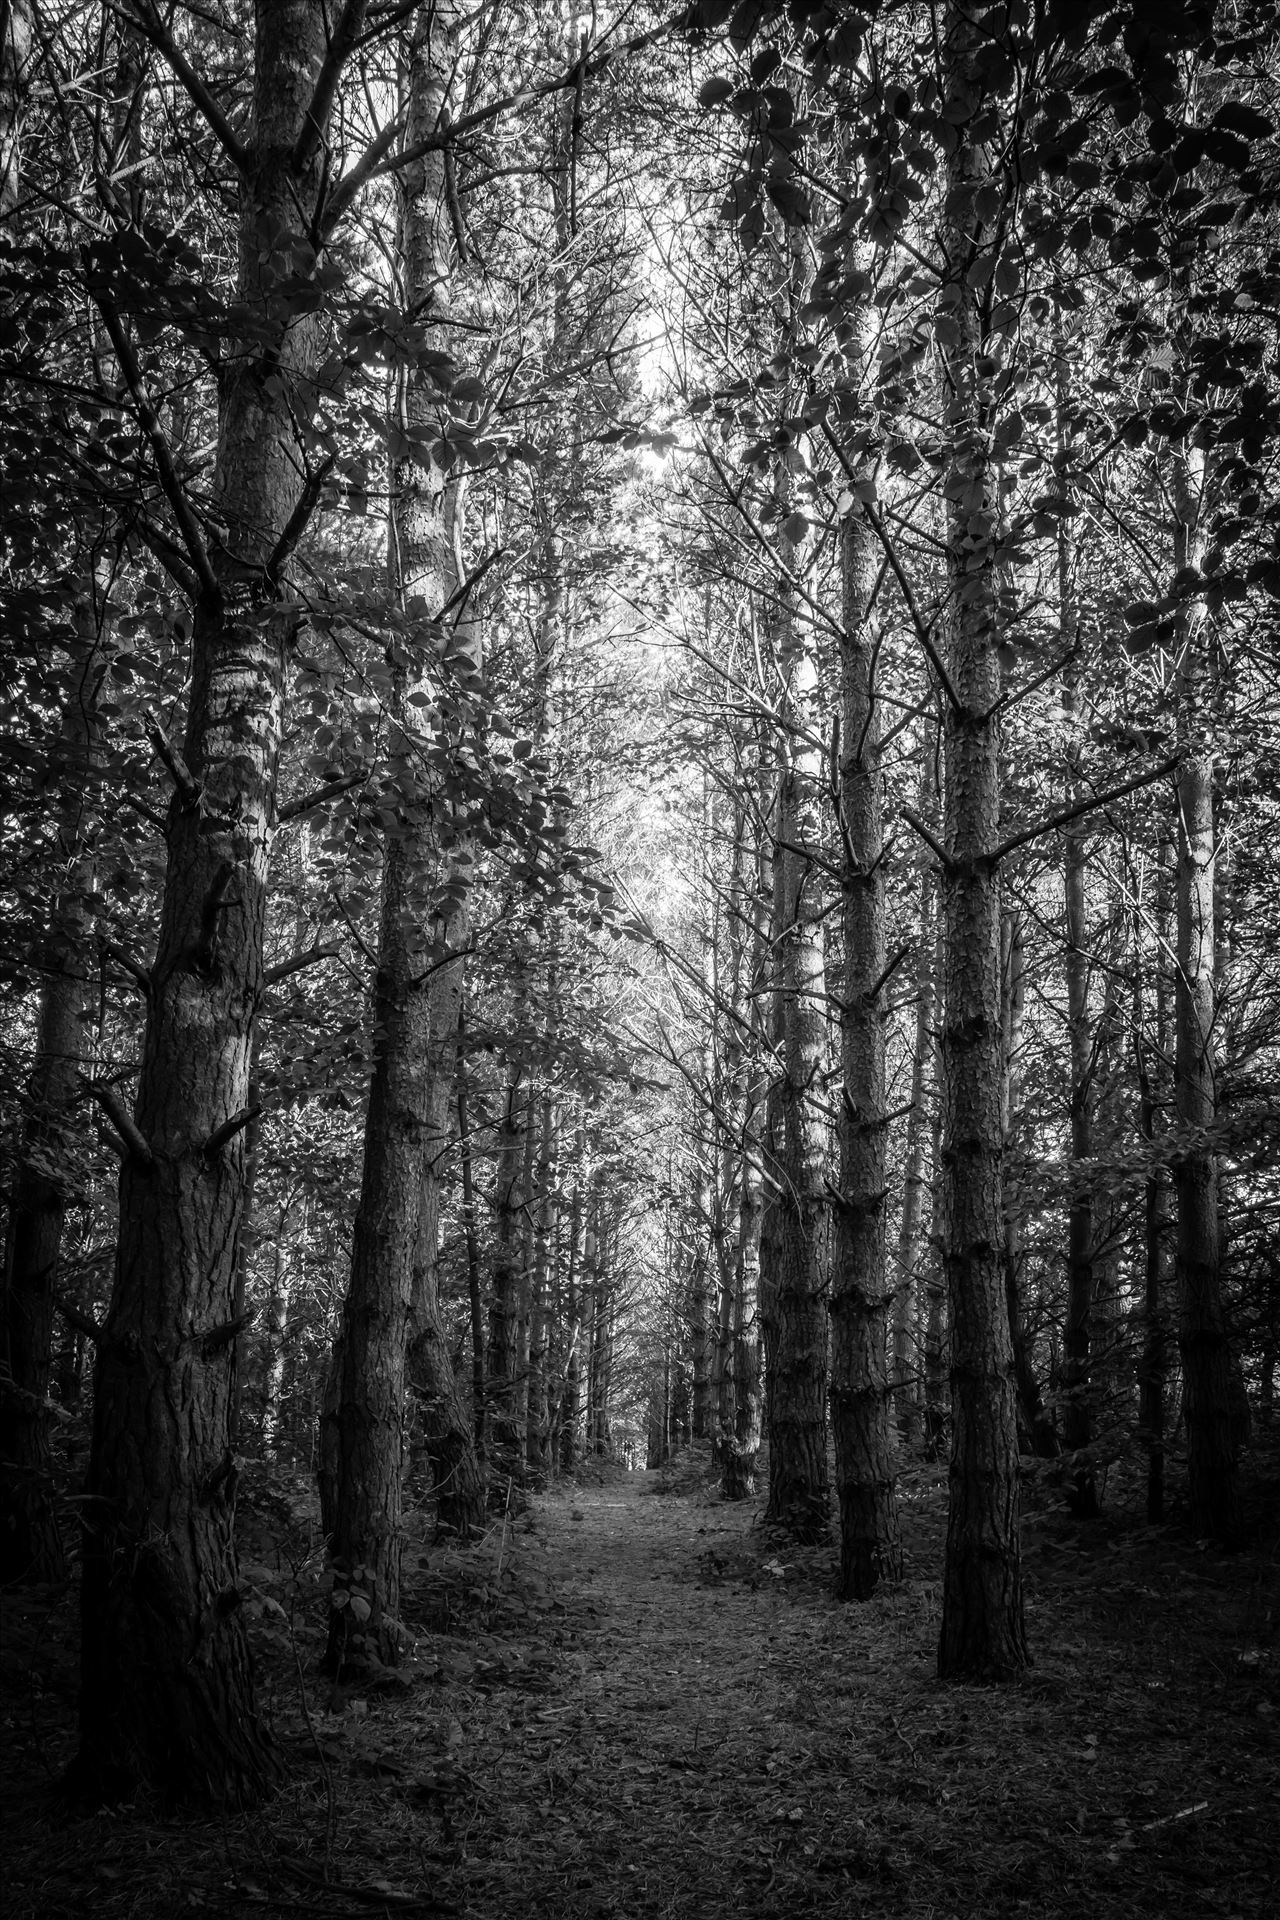 Into the woods  by philreay